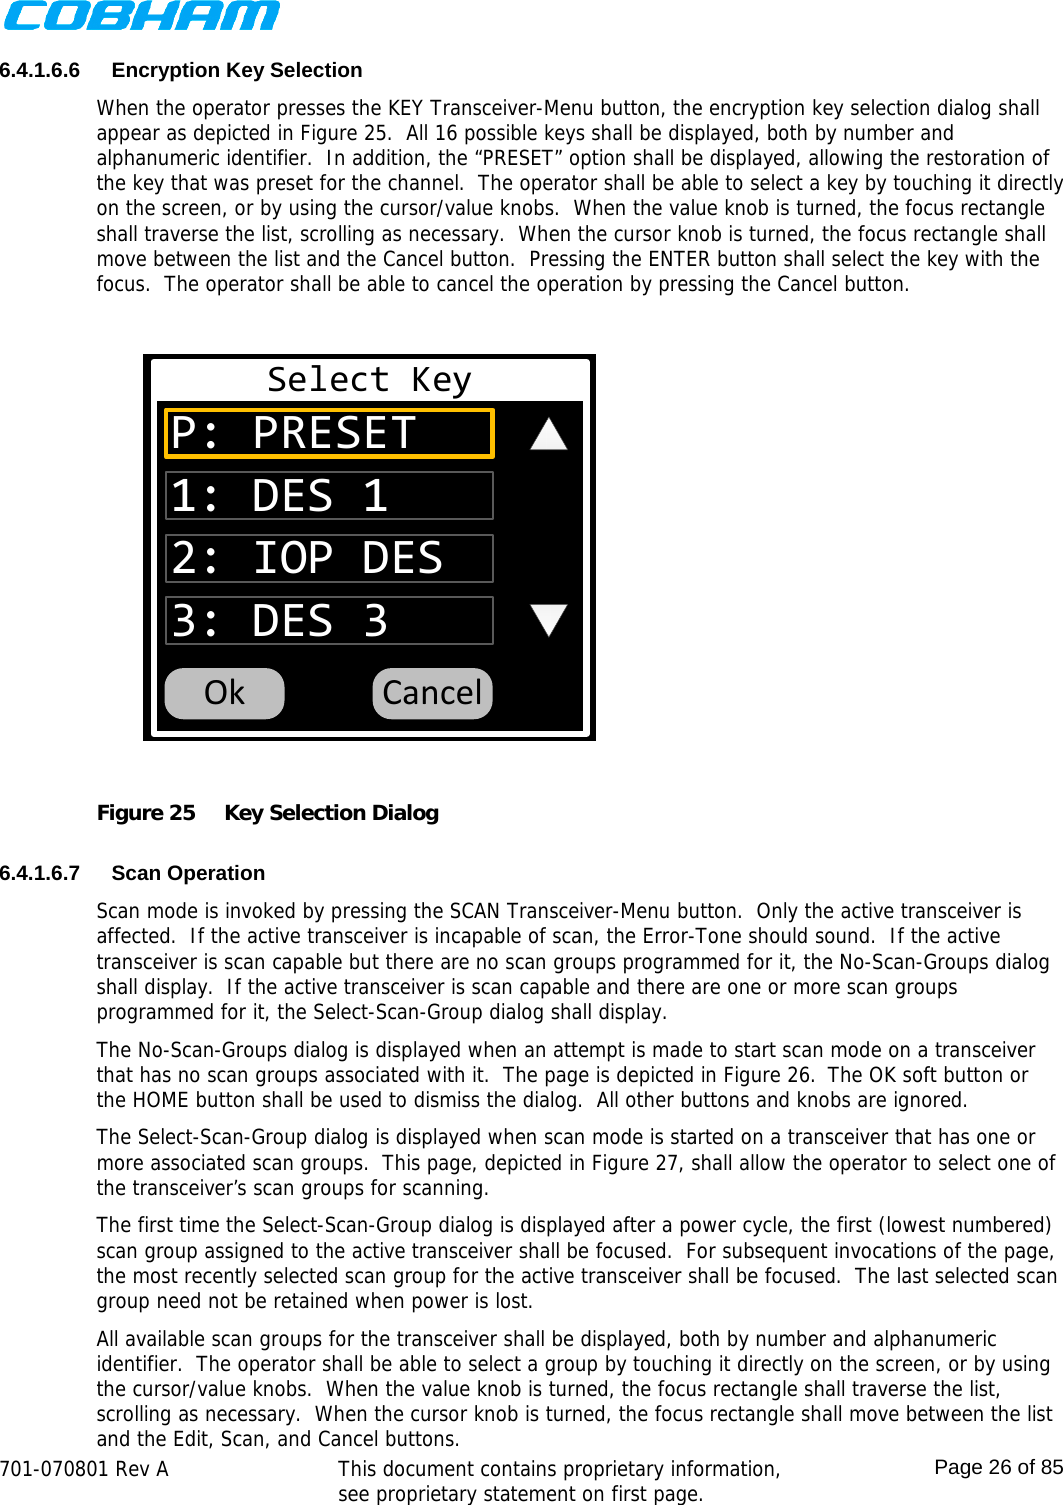    701-070801 Rev A   This document contains proprietary information, see proprietary statement on first page.  Page 26 of 85  6.4.1.6.6 Encryption Key Selection When the operator presses the KEY Transceiver-Menu button, the encryption key selection dialog shall appear as depicted in Figure 25.  All 16 possible keys shall be displayed, both by number and alphanumeric identifier.  In addition, the “PRESET” option shall be displayed, allowing the restoration of the key that was preset for the channel.  The operator shall be able to select a key by touching it directly on the screen, or by using the cursor/value knobs.  When the value knob is turned, the focus rectangle shall traverse the list, scrolling as necessary.  When the cursor knob is turned, the focus rectangle shall move between the list and the Cancel button.  Pressing the ENTER button shall select the key with the focus.  The operator shall be able to cancel the operation by pressing the Cancel button. Select KeyP: PRESET2: IOP DES3: DES 31: DES 1CancelOk Figure 25  Key Selection Dialog  6.4.1.6.7 Scan Operation Scan mode is invoked by pressing the SCAN Transceiver-Menu button.  Only the active transceiver is affected.  If the active transceiver is incapable of scan, the Error-Tone should sound.  If the active transceiver is scan capable but there are no scan groups programmed for it, the No-Scan-Groups dialog shall display.  If the active transceiver is scan capable and there are one or more scan groups programmed for it, the Select-Scan-Group dialog shall display.  The No-Scan-Groups dialog is displayed when an attempt is made to start scan mode on a transceiver that has no scan groups associated with it.  The page is depicted in Figure 26.  The OK soft button or the HOME button shall be used to dismiss the dialog.  All other buttons and knobs are ignored.  The Select-Scan-Group dialog is displayed when scan mode is started on a transceiver that has one or more associated scan groups.  This page, depicted in Figure 27, shall allow the operator to select one of the transceiver’s scan groups for scanning. The first time the Select-Scan-Group dialog is displayed after a power cycle, the first (lowest numbered) scan group assigned to the active transceiver shall be focused.  For subsequent invocations of the page, the most recently selected scan group for the active transceiver shall be focused.  The last selected scan group need not be retained when power is lost. All available scan groups for the transceiver shall be displayed, both by number and alphanumeric identifier.  The operator shall be able to select a group by touching it directly on the screen, or by using the cursor/value knobs.  When the value knob is turned, the focus rectangle shall traverse the list, scrolling as necessary.  When the cursor knob is turned, the focus rectangle shall move between the list and the Edit, Scan, and Cancel buttons. 